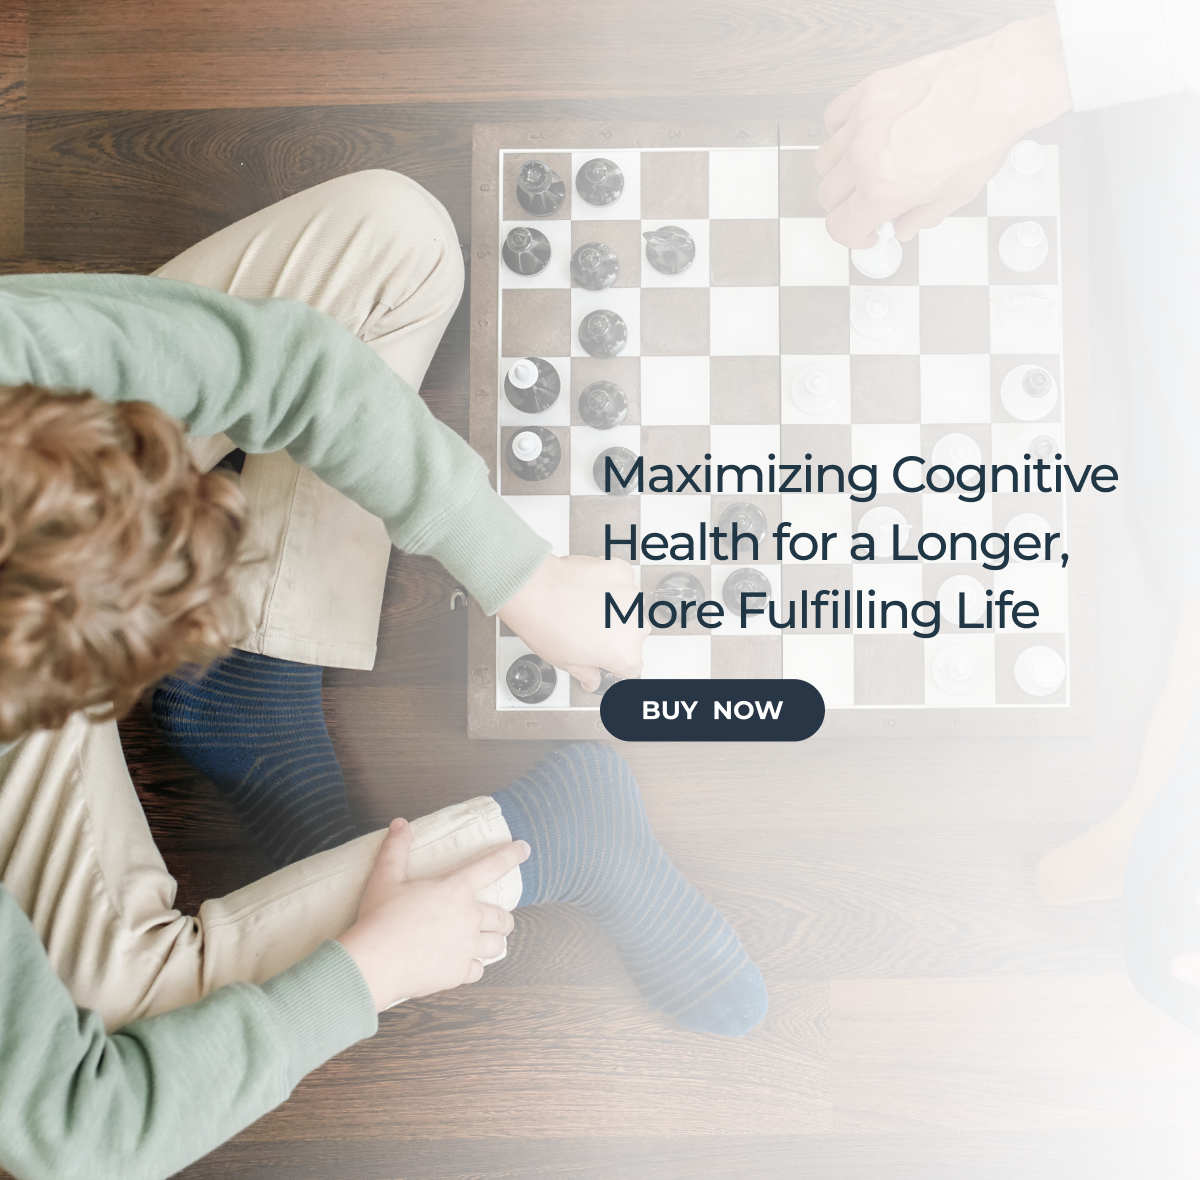 Maximizing Cognitive Health for a Longer, More Fulfilling Life buy now